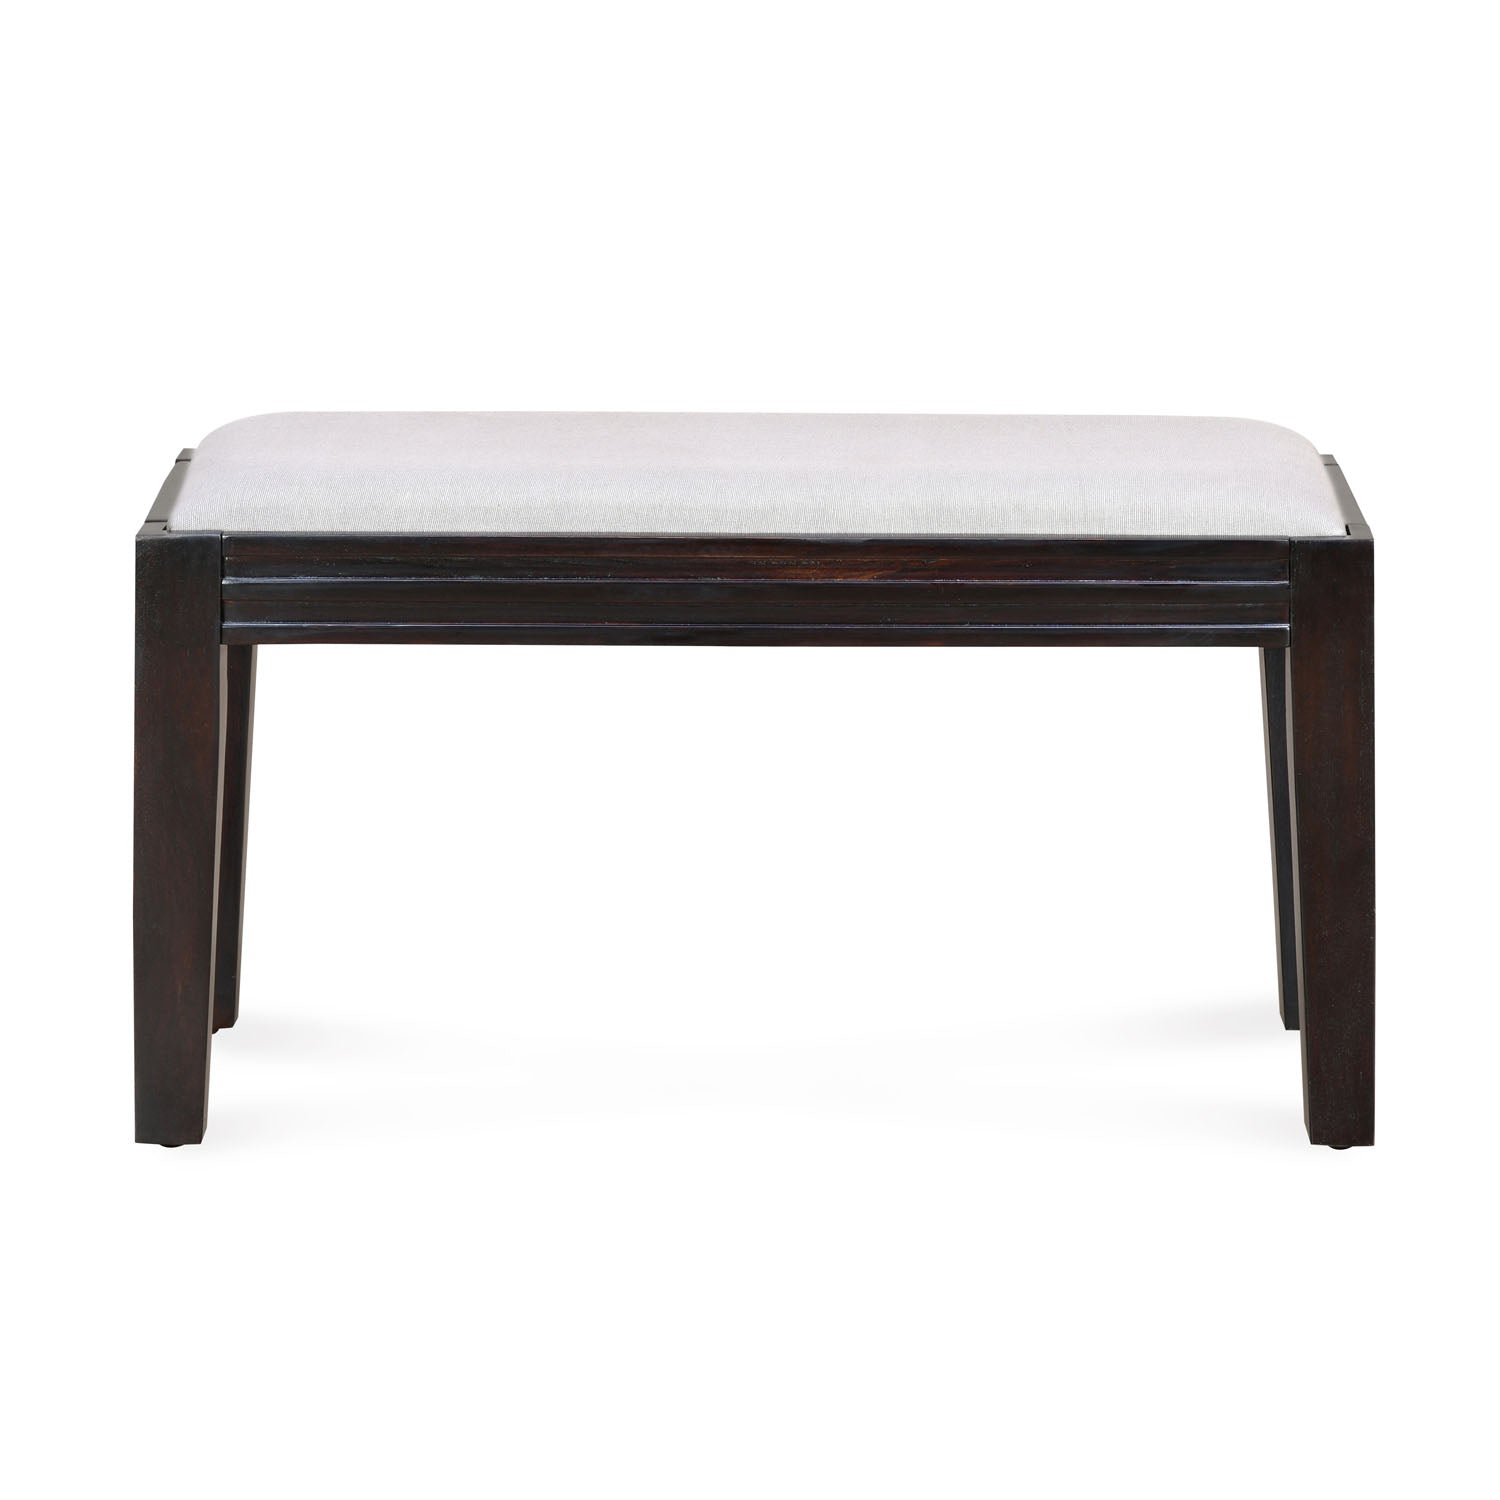 Virtue Solid Wood Dining Bench (Natural Walnut)